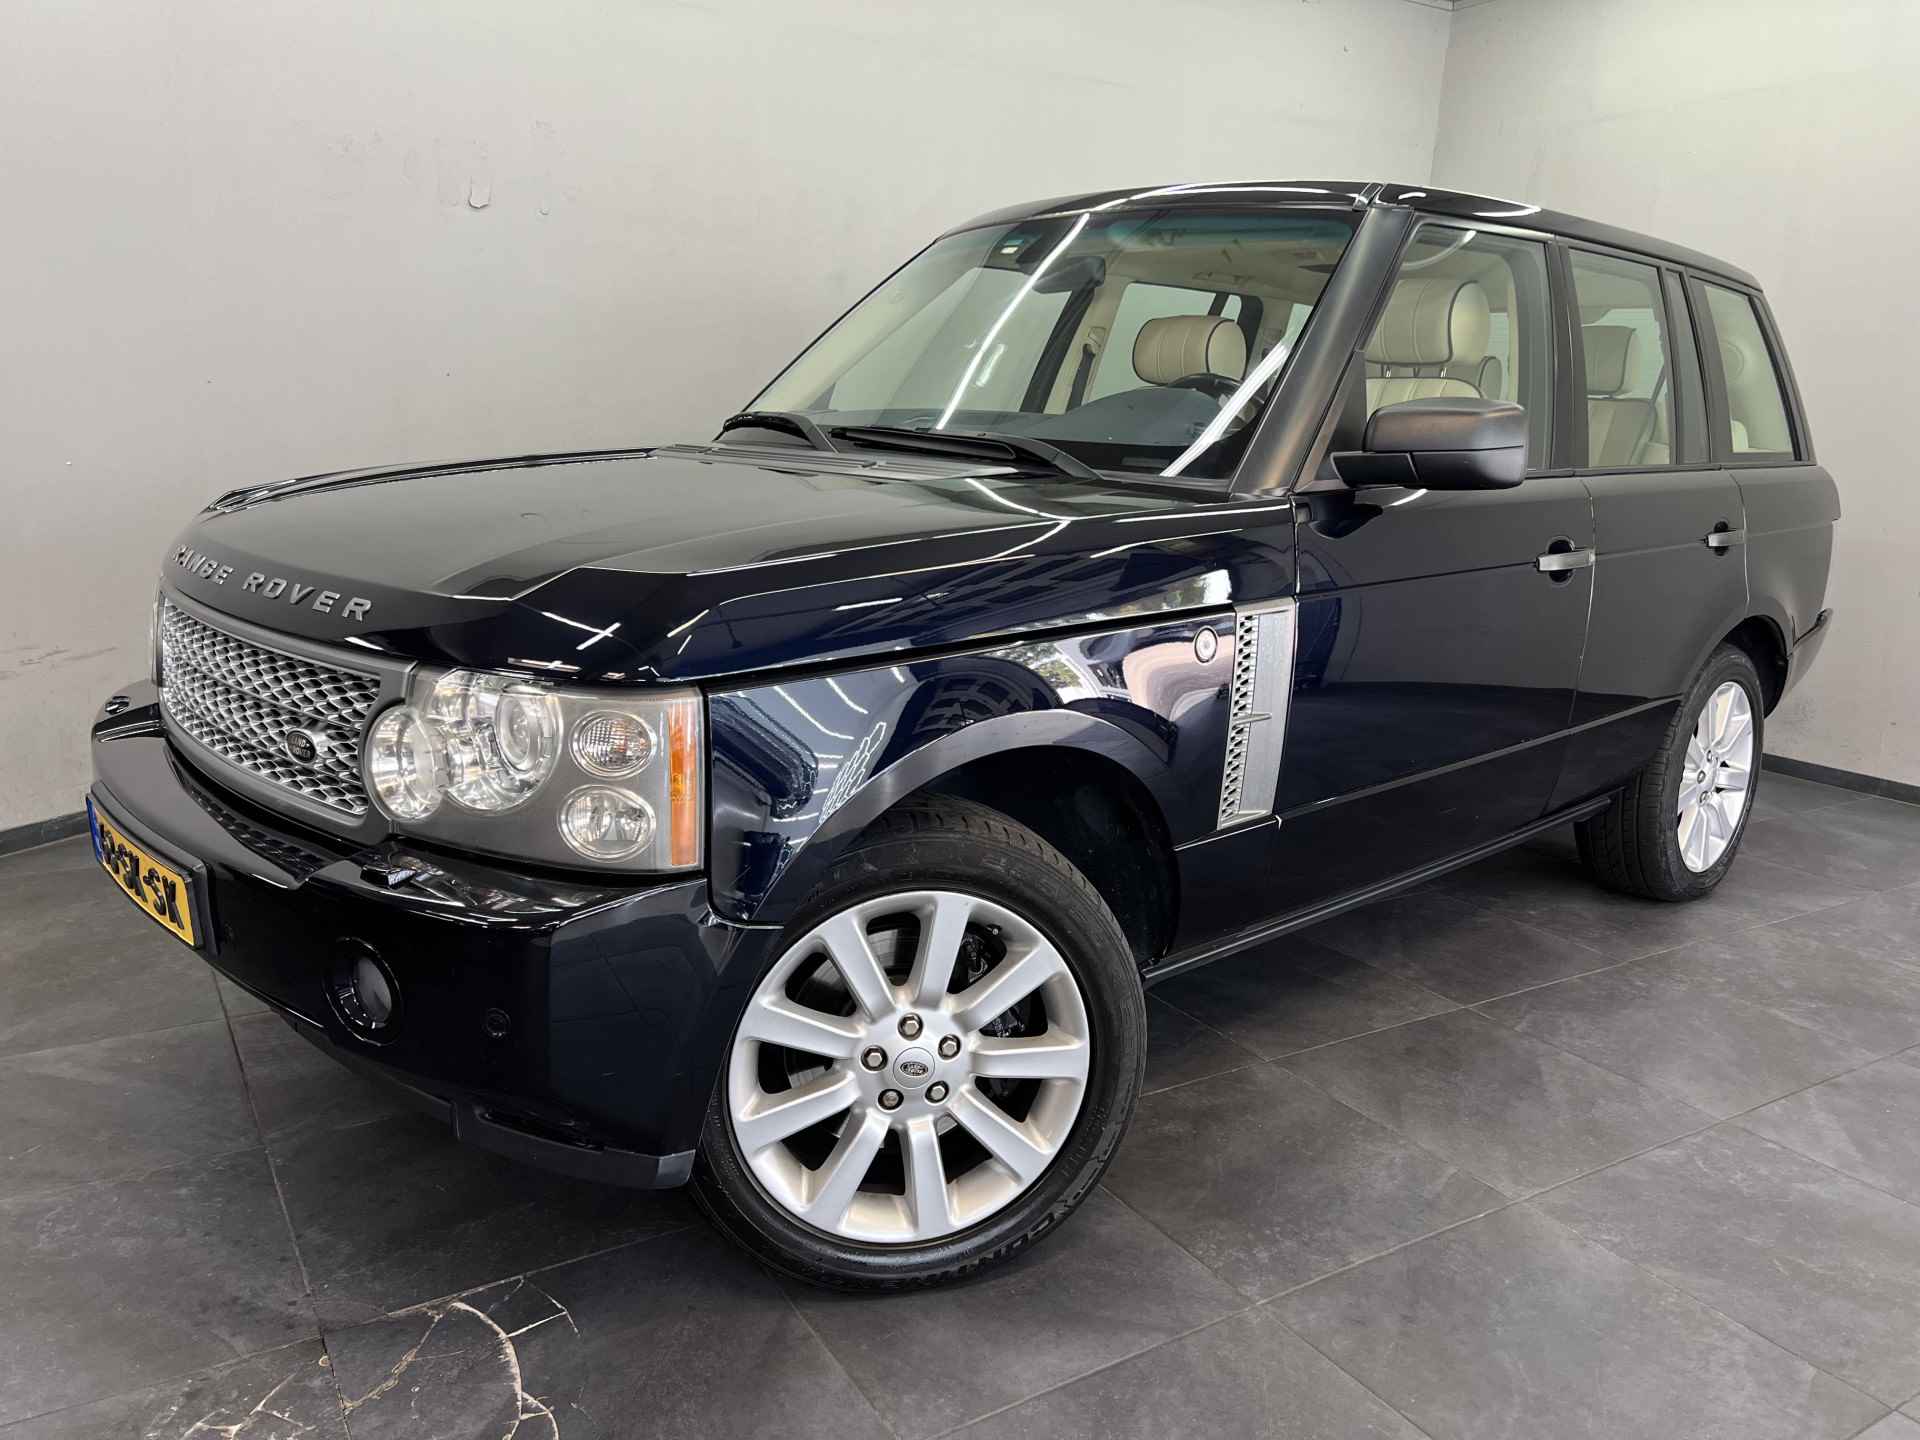 Land Rover Range Rover 4.2 V8 Supercharged ✅UNIEKE STAAT✅Airco✅Cruise controle✅Navigatie✅5 deurs✅TREKHAAK - 4/52